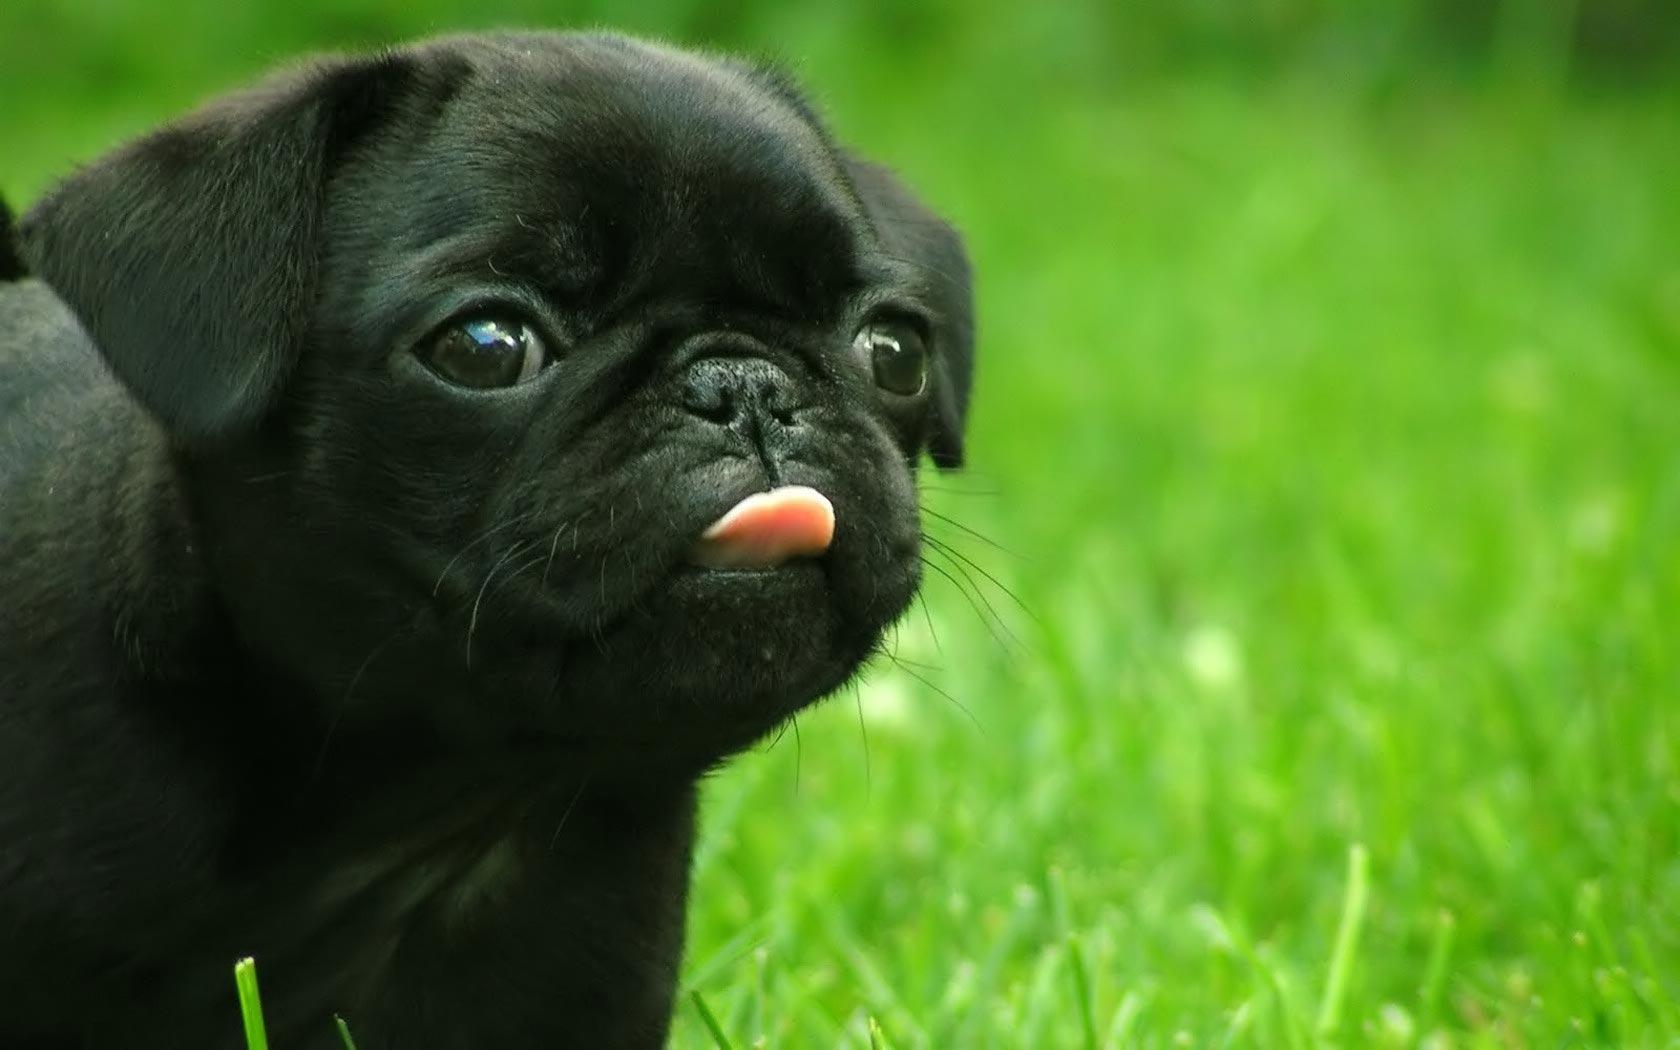 Black Pug photo and wallpaper. Beautiful Black Pug picture